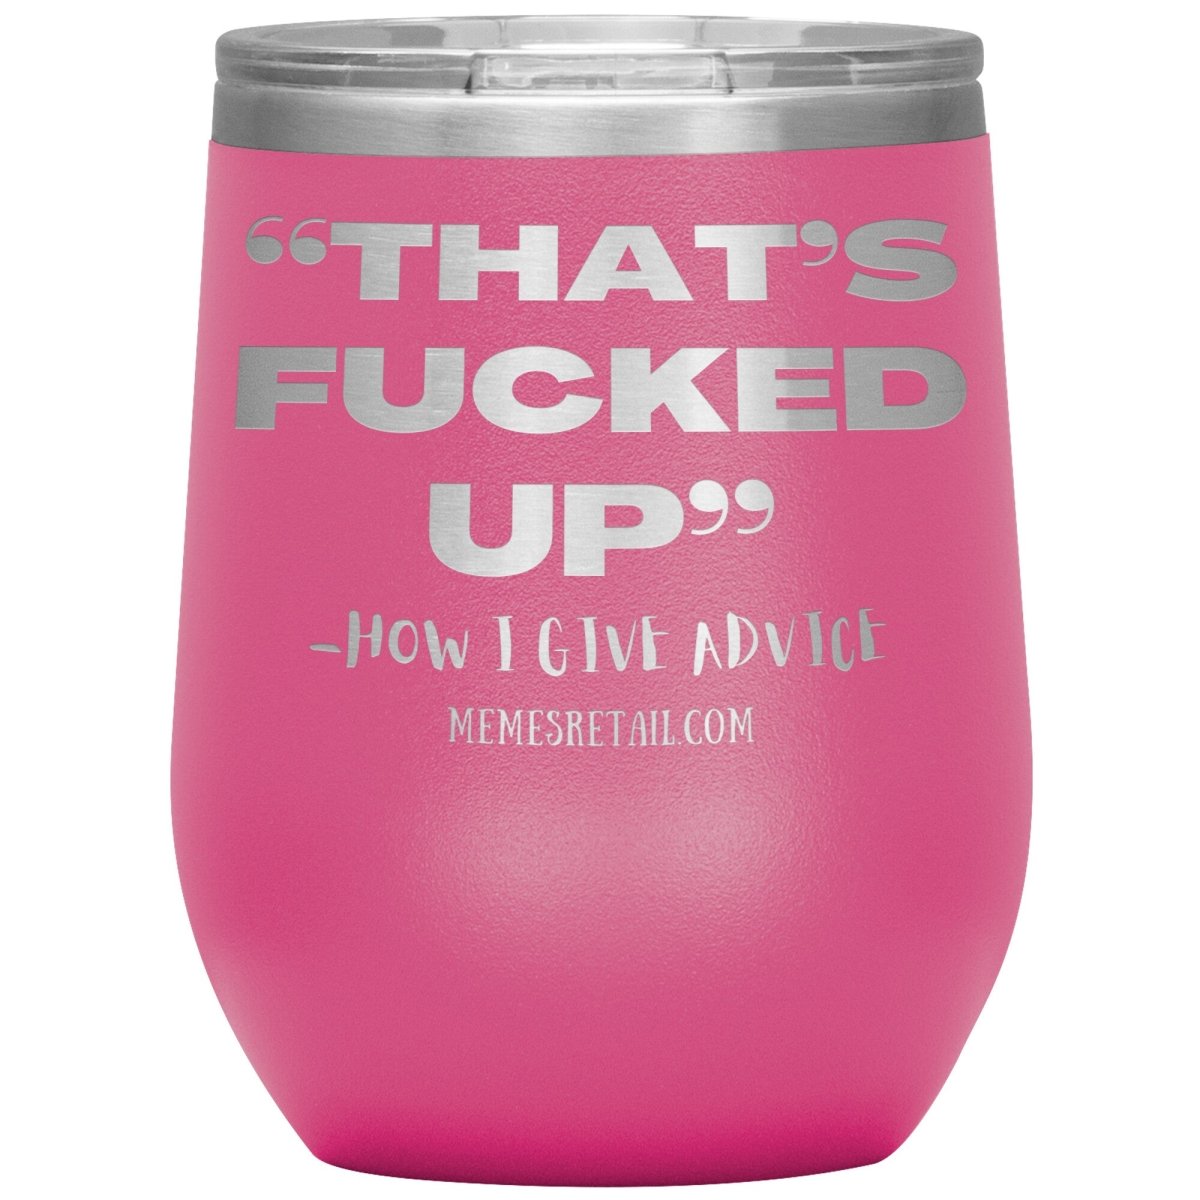 “That’s Fucked Up” -how I give advice Tumblers, 12oz Wine Insulated Tumbler / Pink - MemesRetail.com